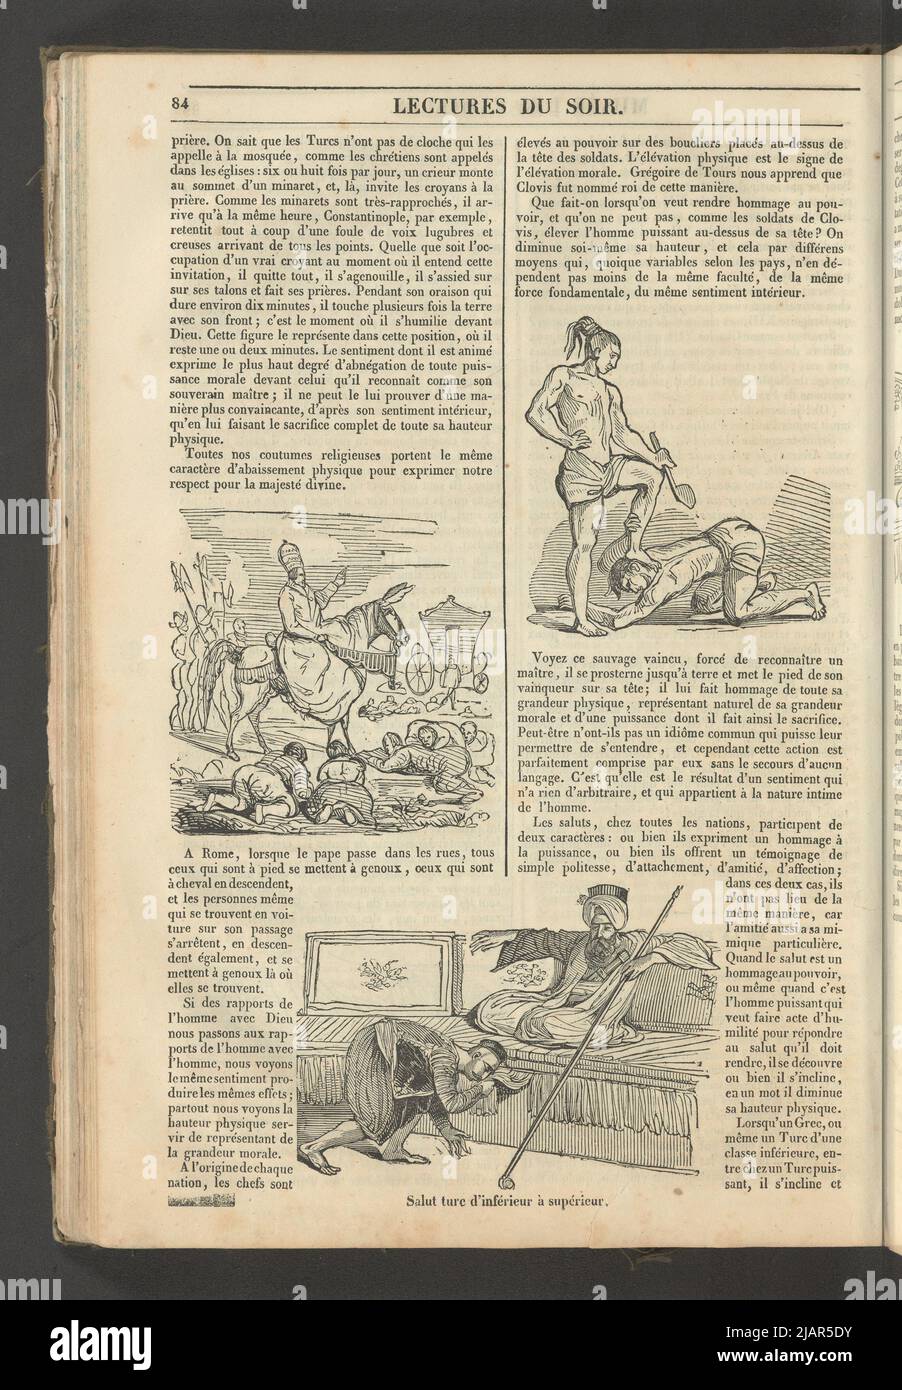 Yearbook 2, notebook 11, Mars 1834 Different ways to worship, 4 illustrations for the article de la phrenologie in: Musee des Familles, Lecture du Soir. T. 1. (year 1 and 2) Paris, [1833 1834]. unknown Stock Photo